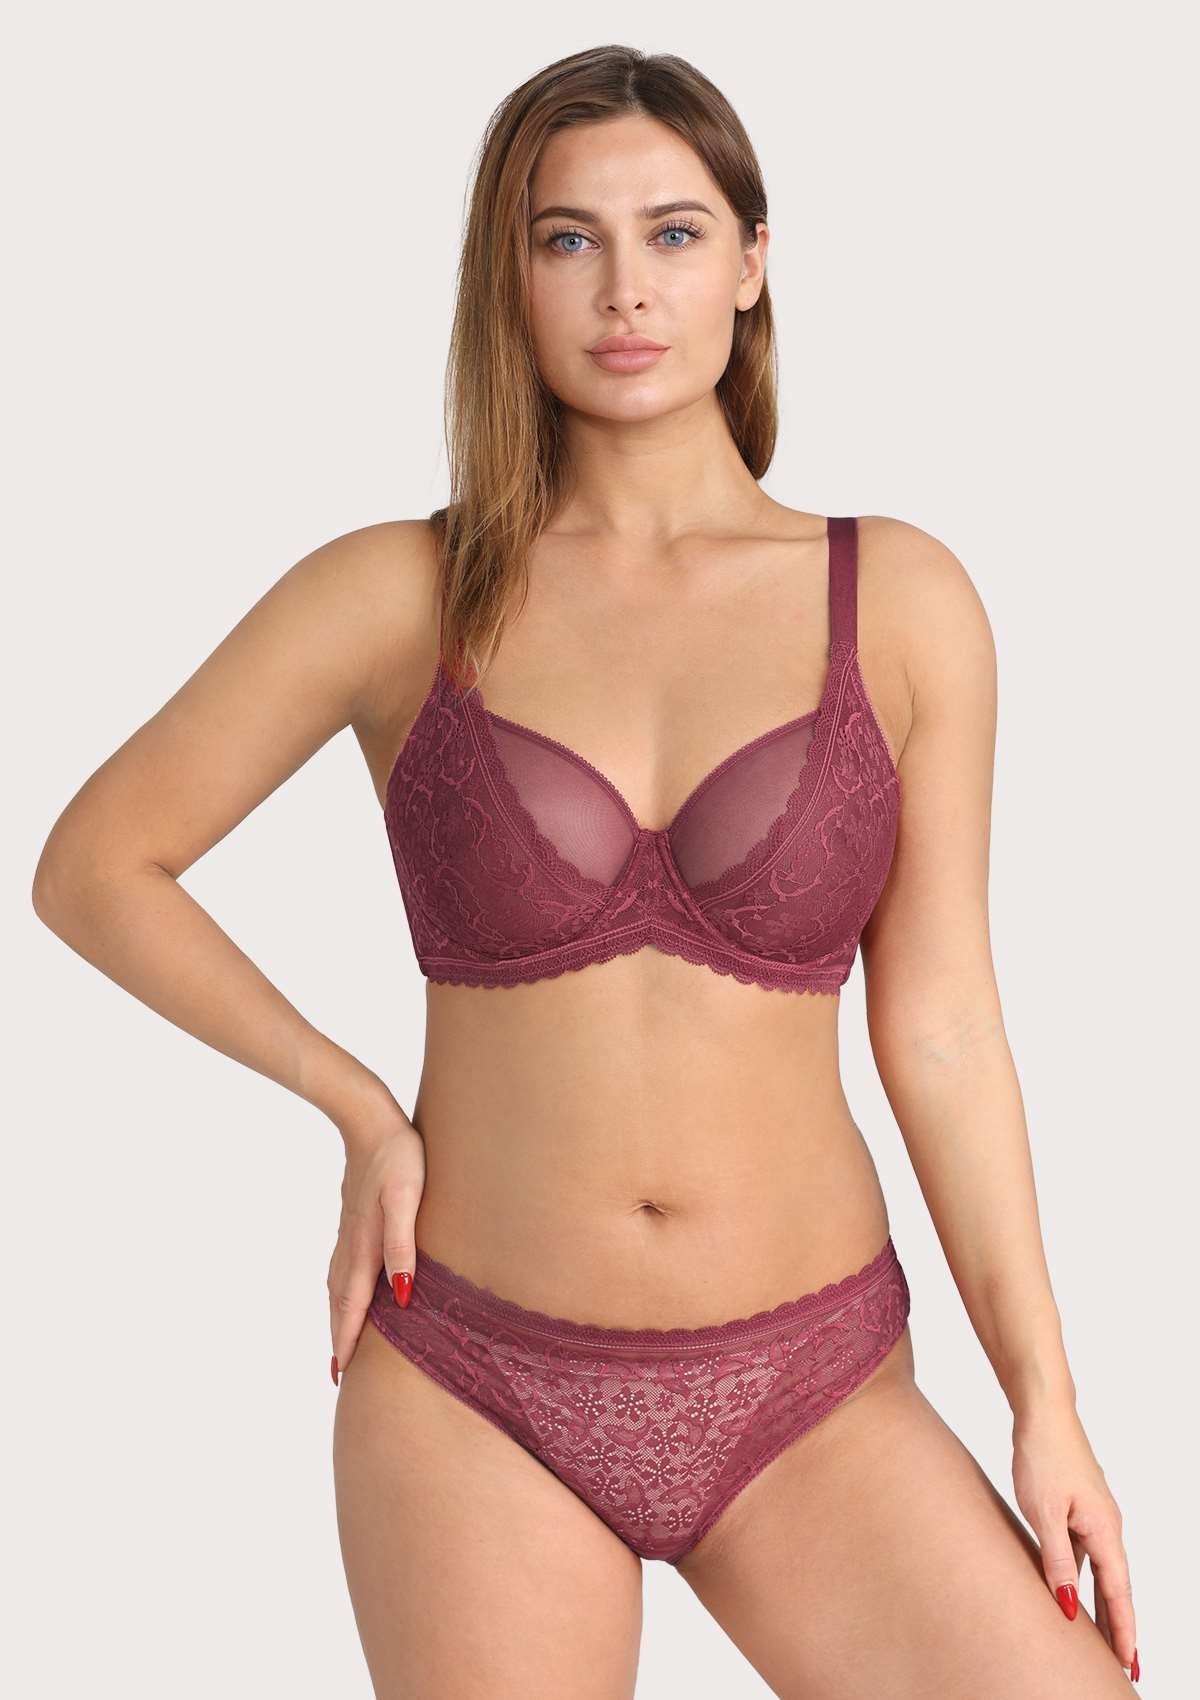 HSIA Anemone Big Bra: Best Bra For Lift And Support, Floral Bra - Burgundy / 34 / D